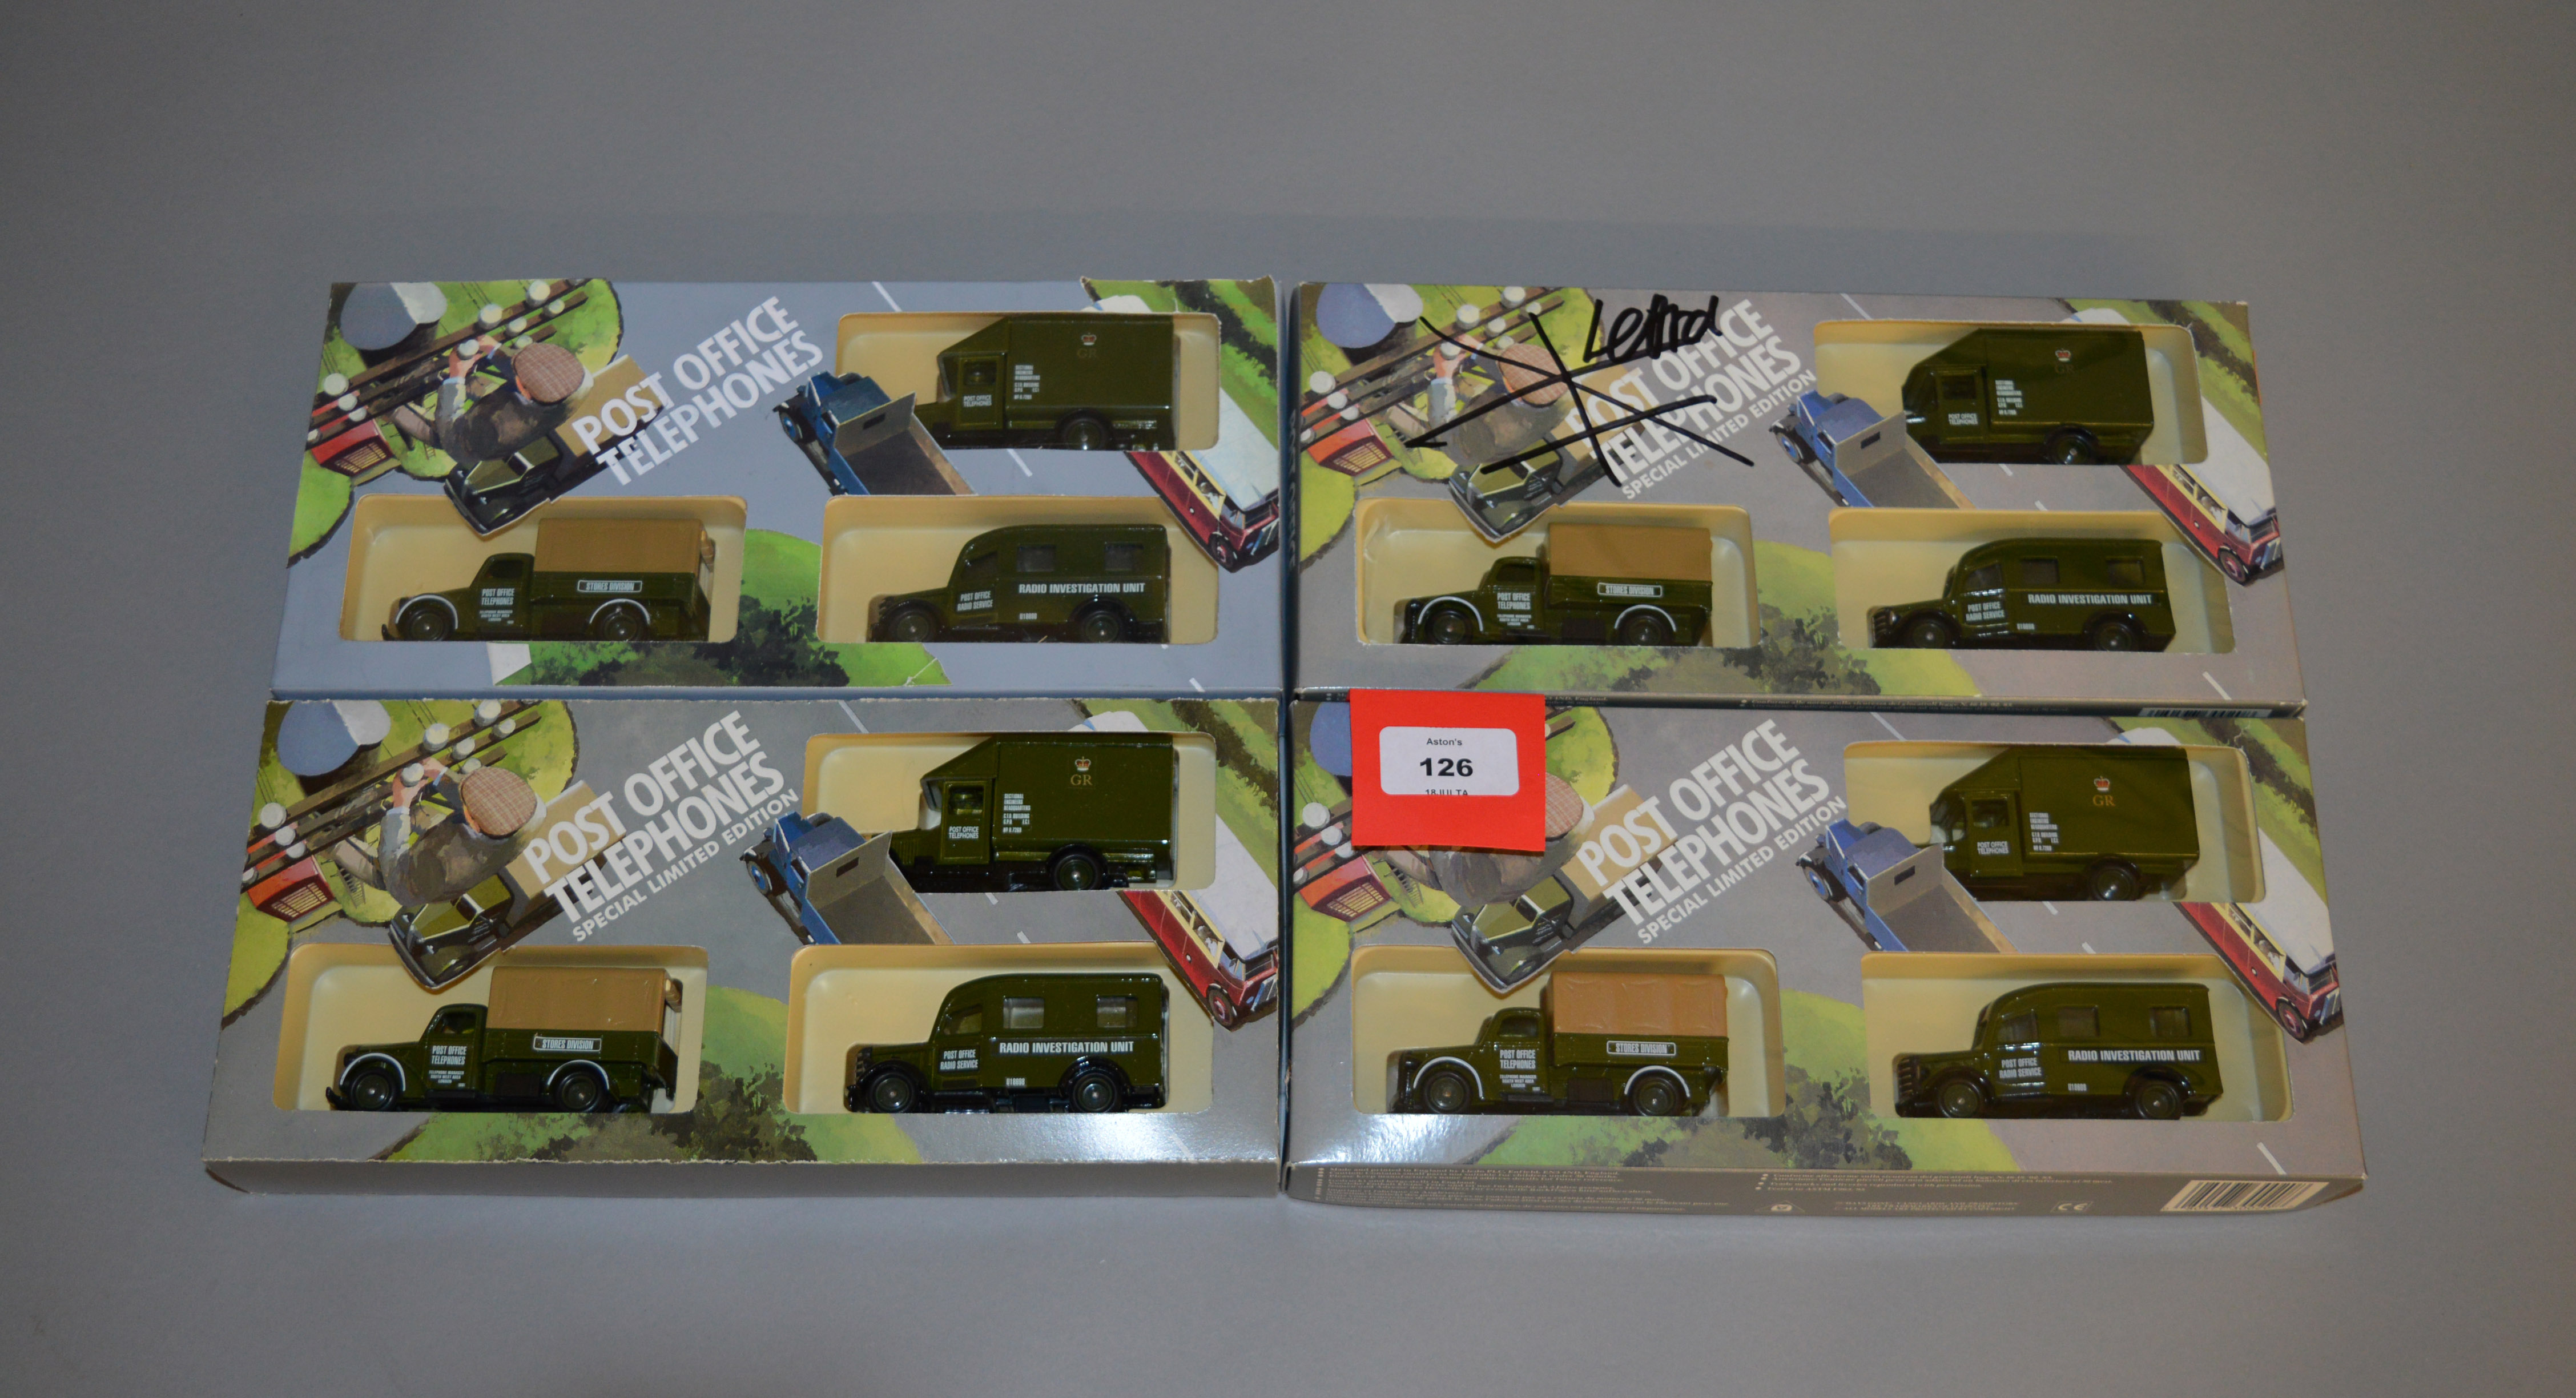 Two versions of the pre-production packaging for the Lledo 'Post Office Telephone' diecast model